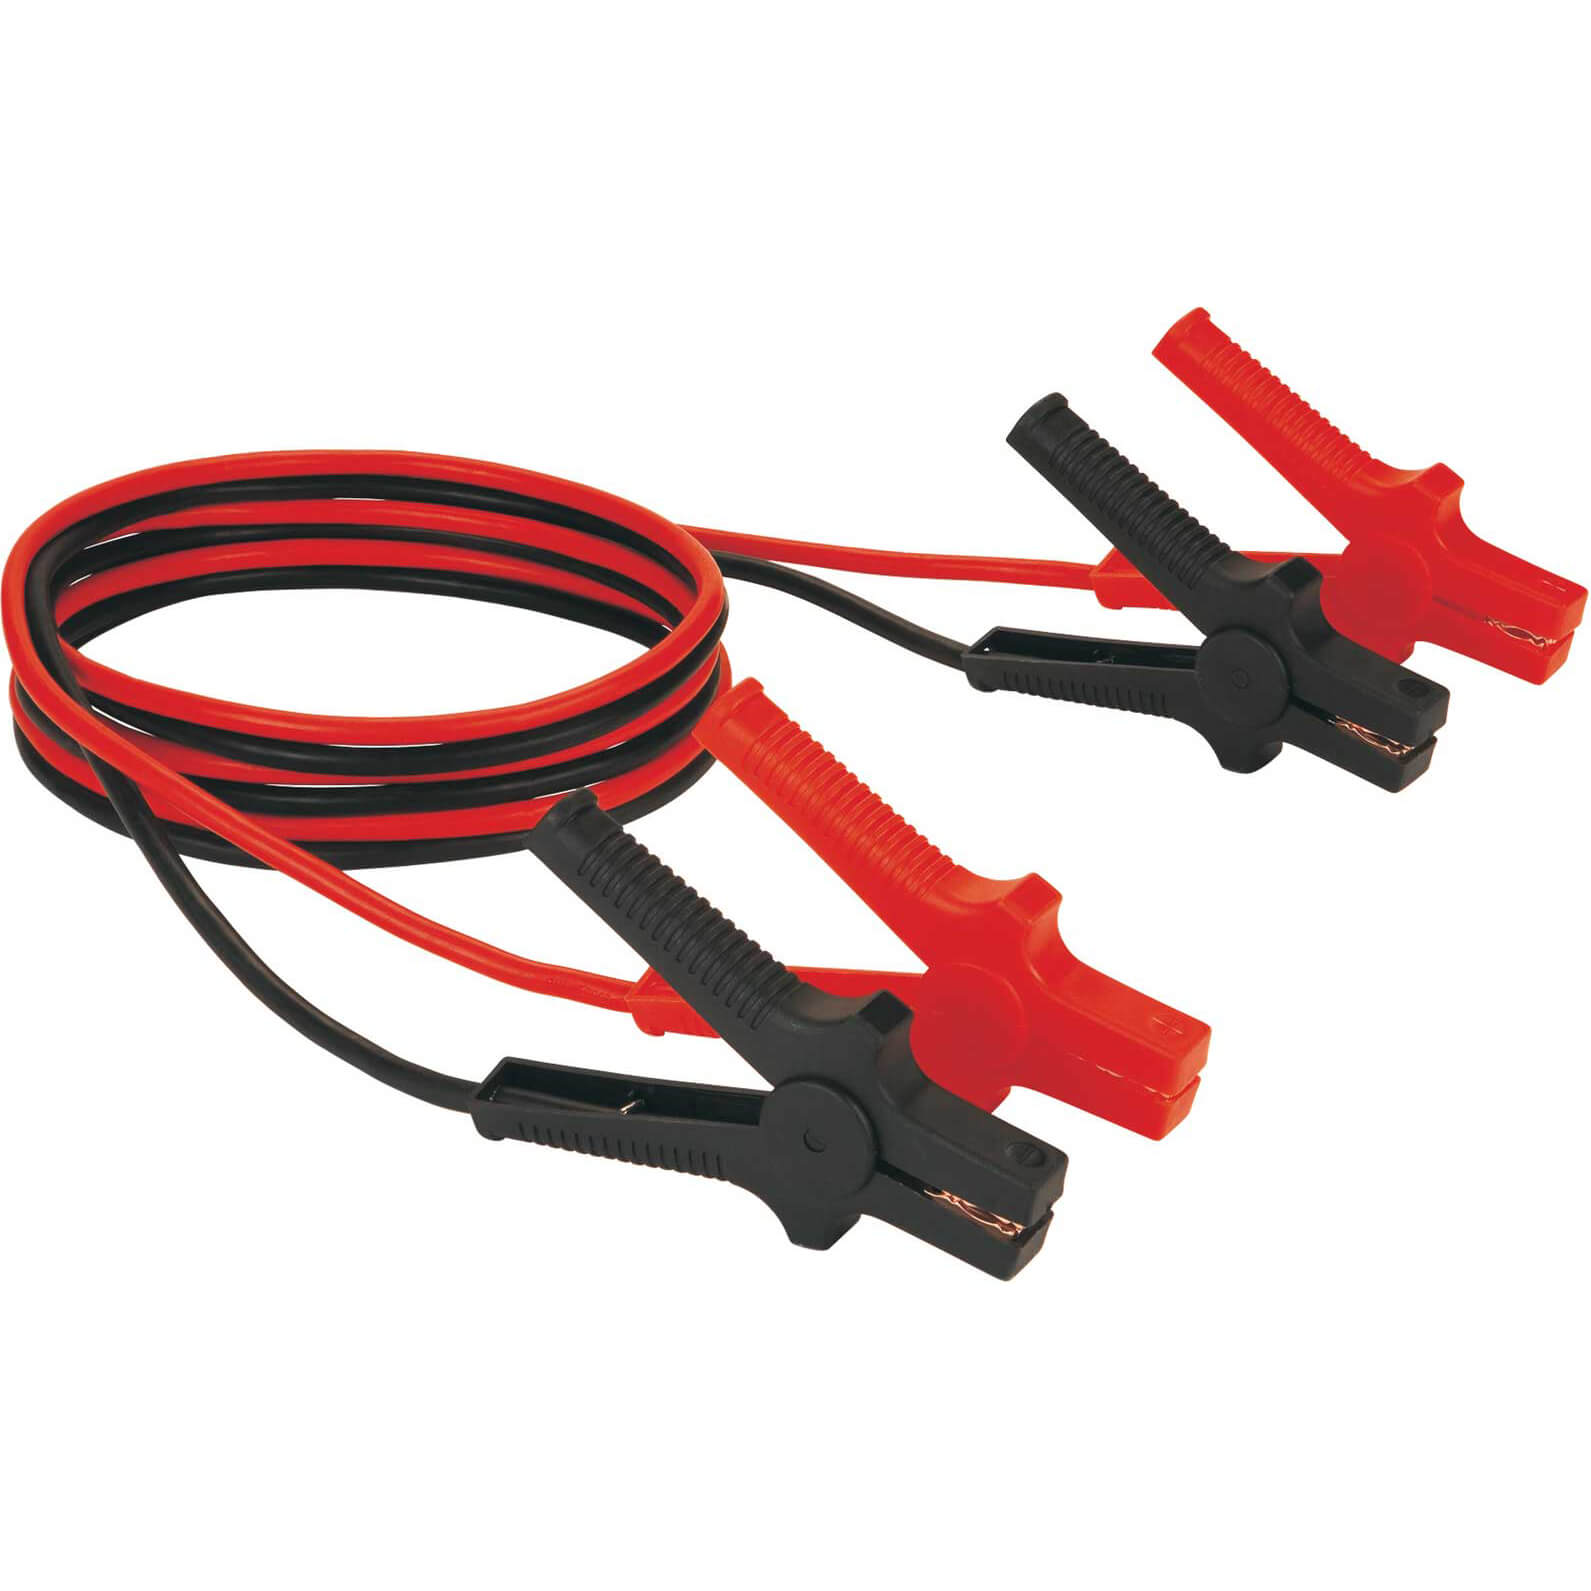 Einhell BT-BO 25/1 A Booster or Jump Cable for Petrol and Diesel Engines 3.5m